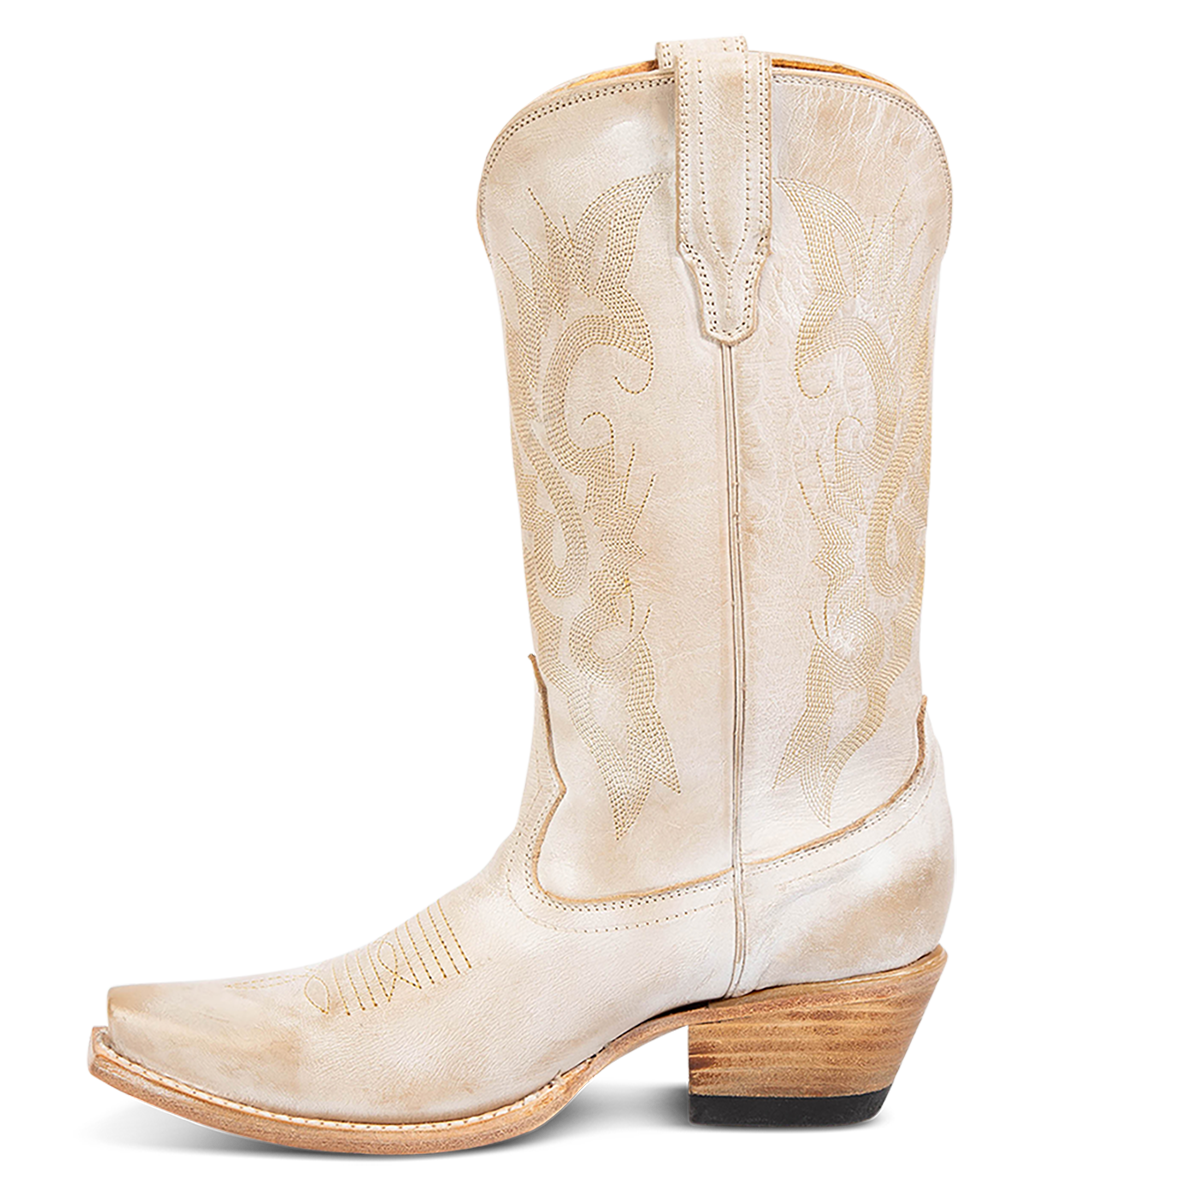 Side view showing FREEBIRD women's Woody beige leather boot with stitch detailing and snip toe construction